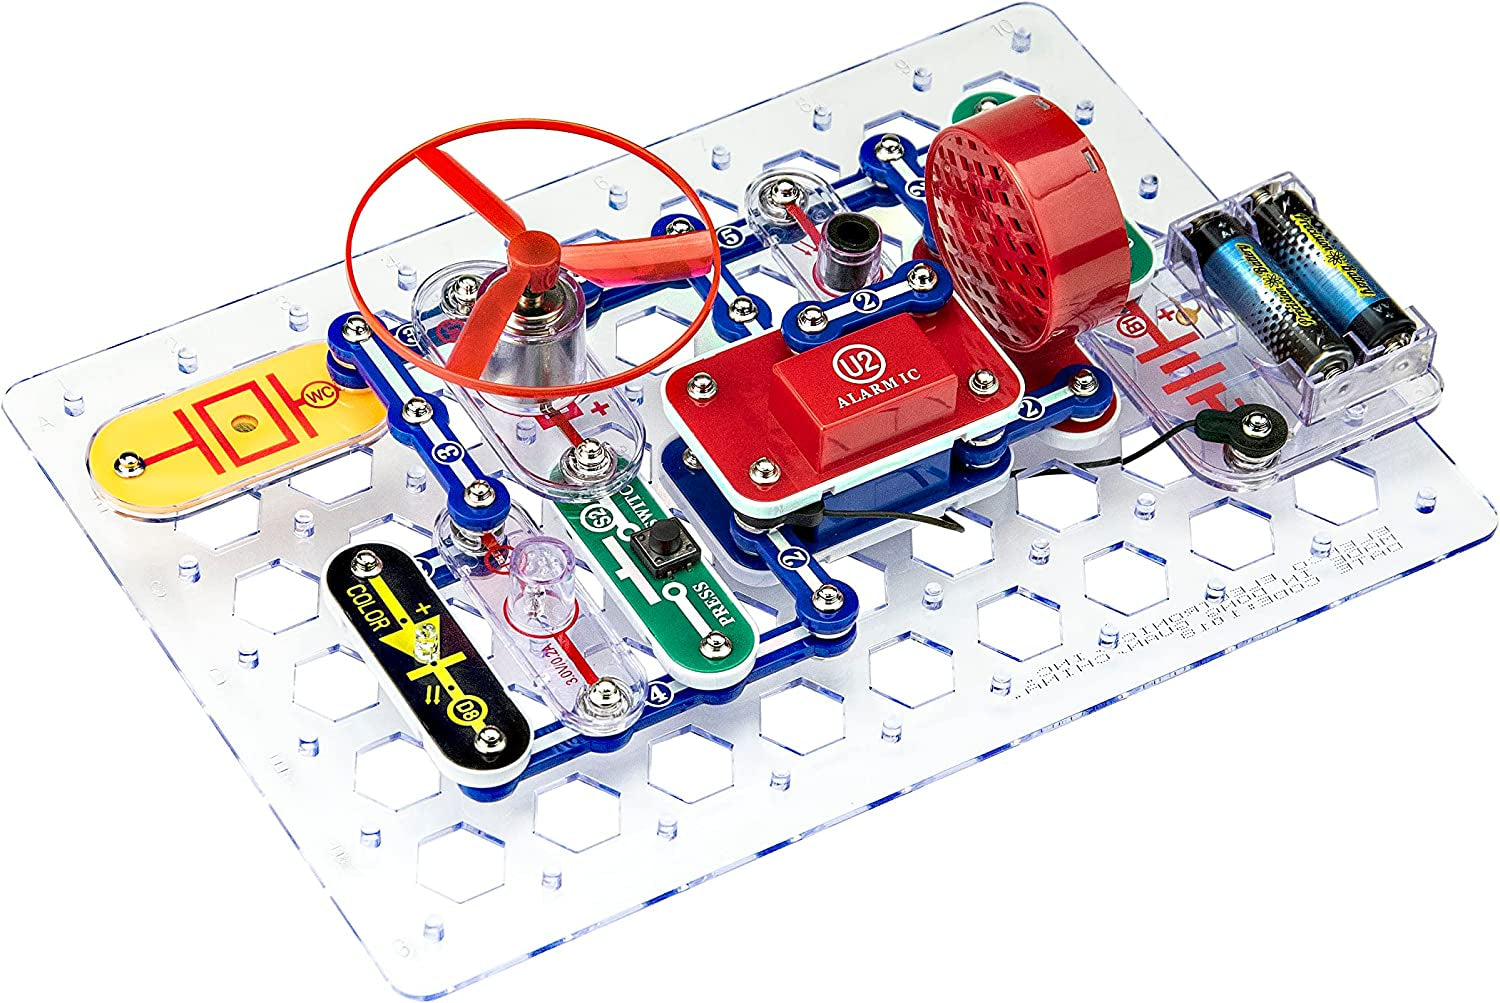 Snap Circuits Jr. SC-100 Electronics Exploration Kit, over 100 Projects, Full Color Project Manual, 28 Snap Circuits Parts, STEM Educational Toy for Kids 8 +